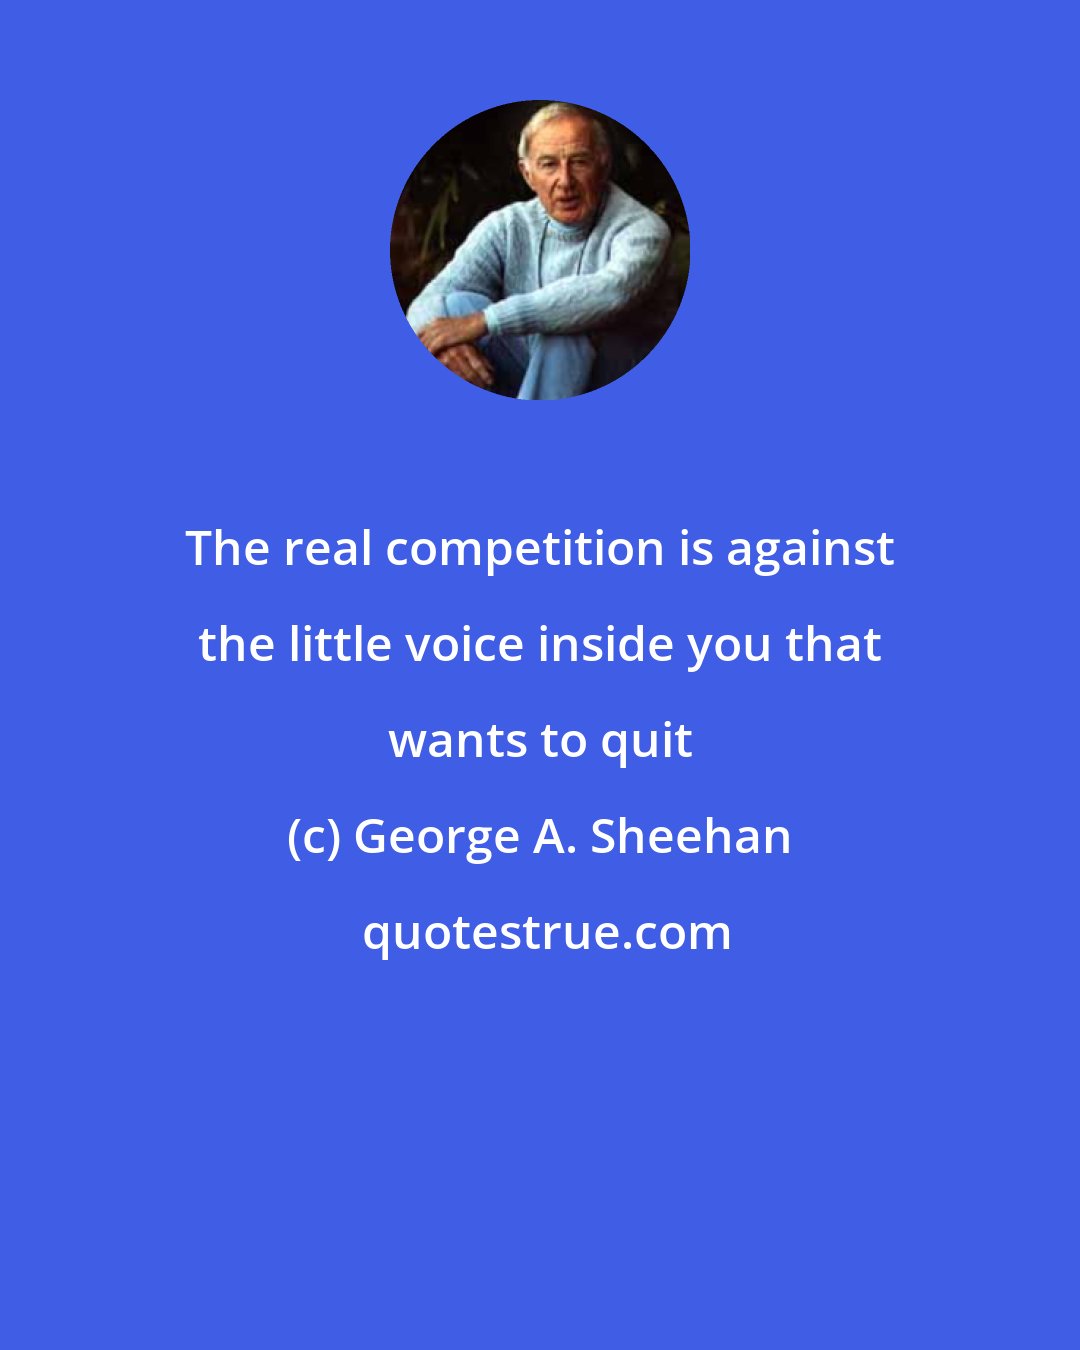 George A. Sheehan: The real competition is against the little voice inside you that wants to quit